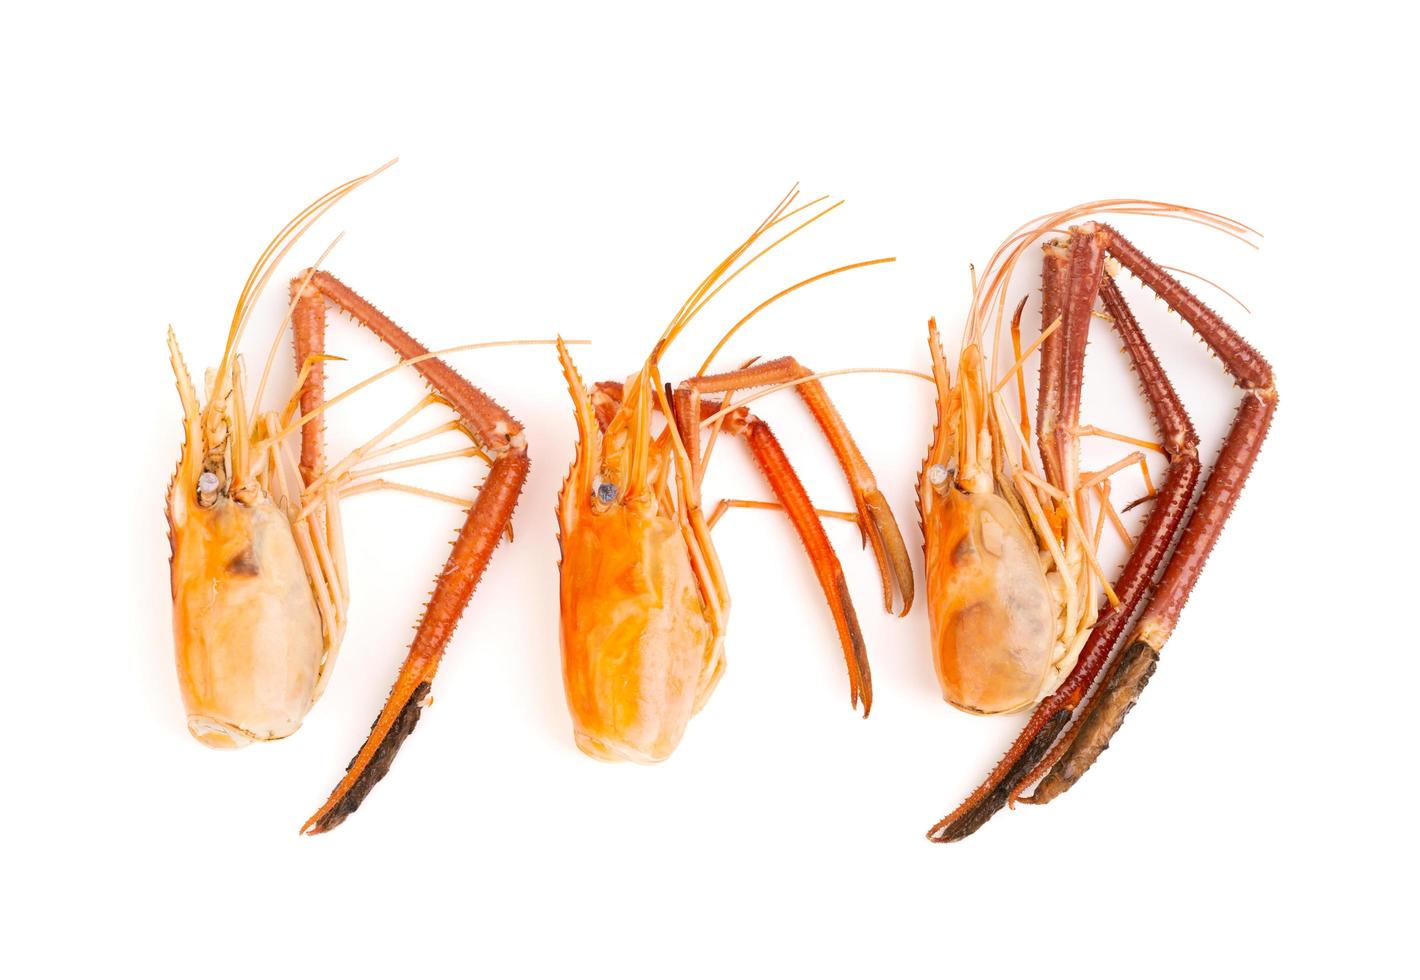 three shrimp heads And shrimp shells, food scraps, leftovers, waste, natural seafood. lunch. dinner isolated on white background photo